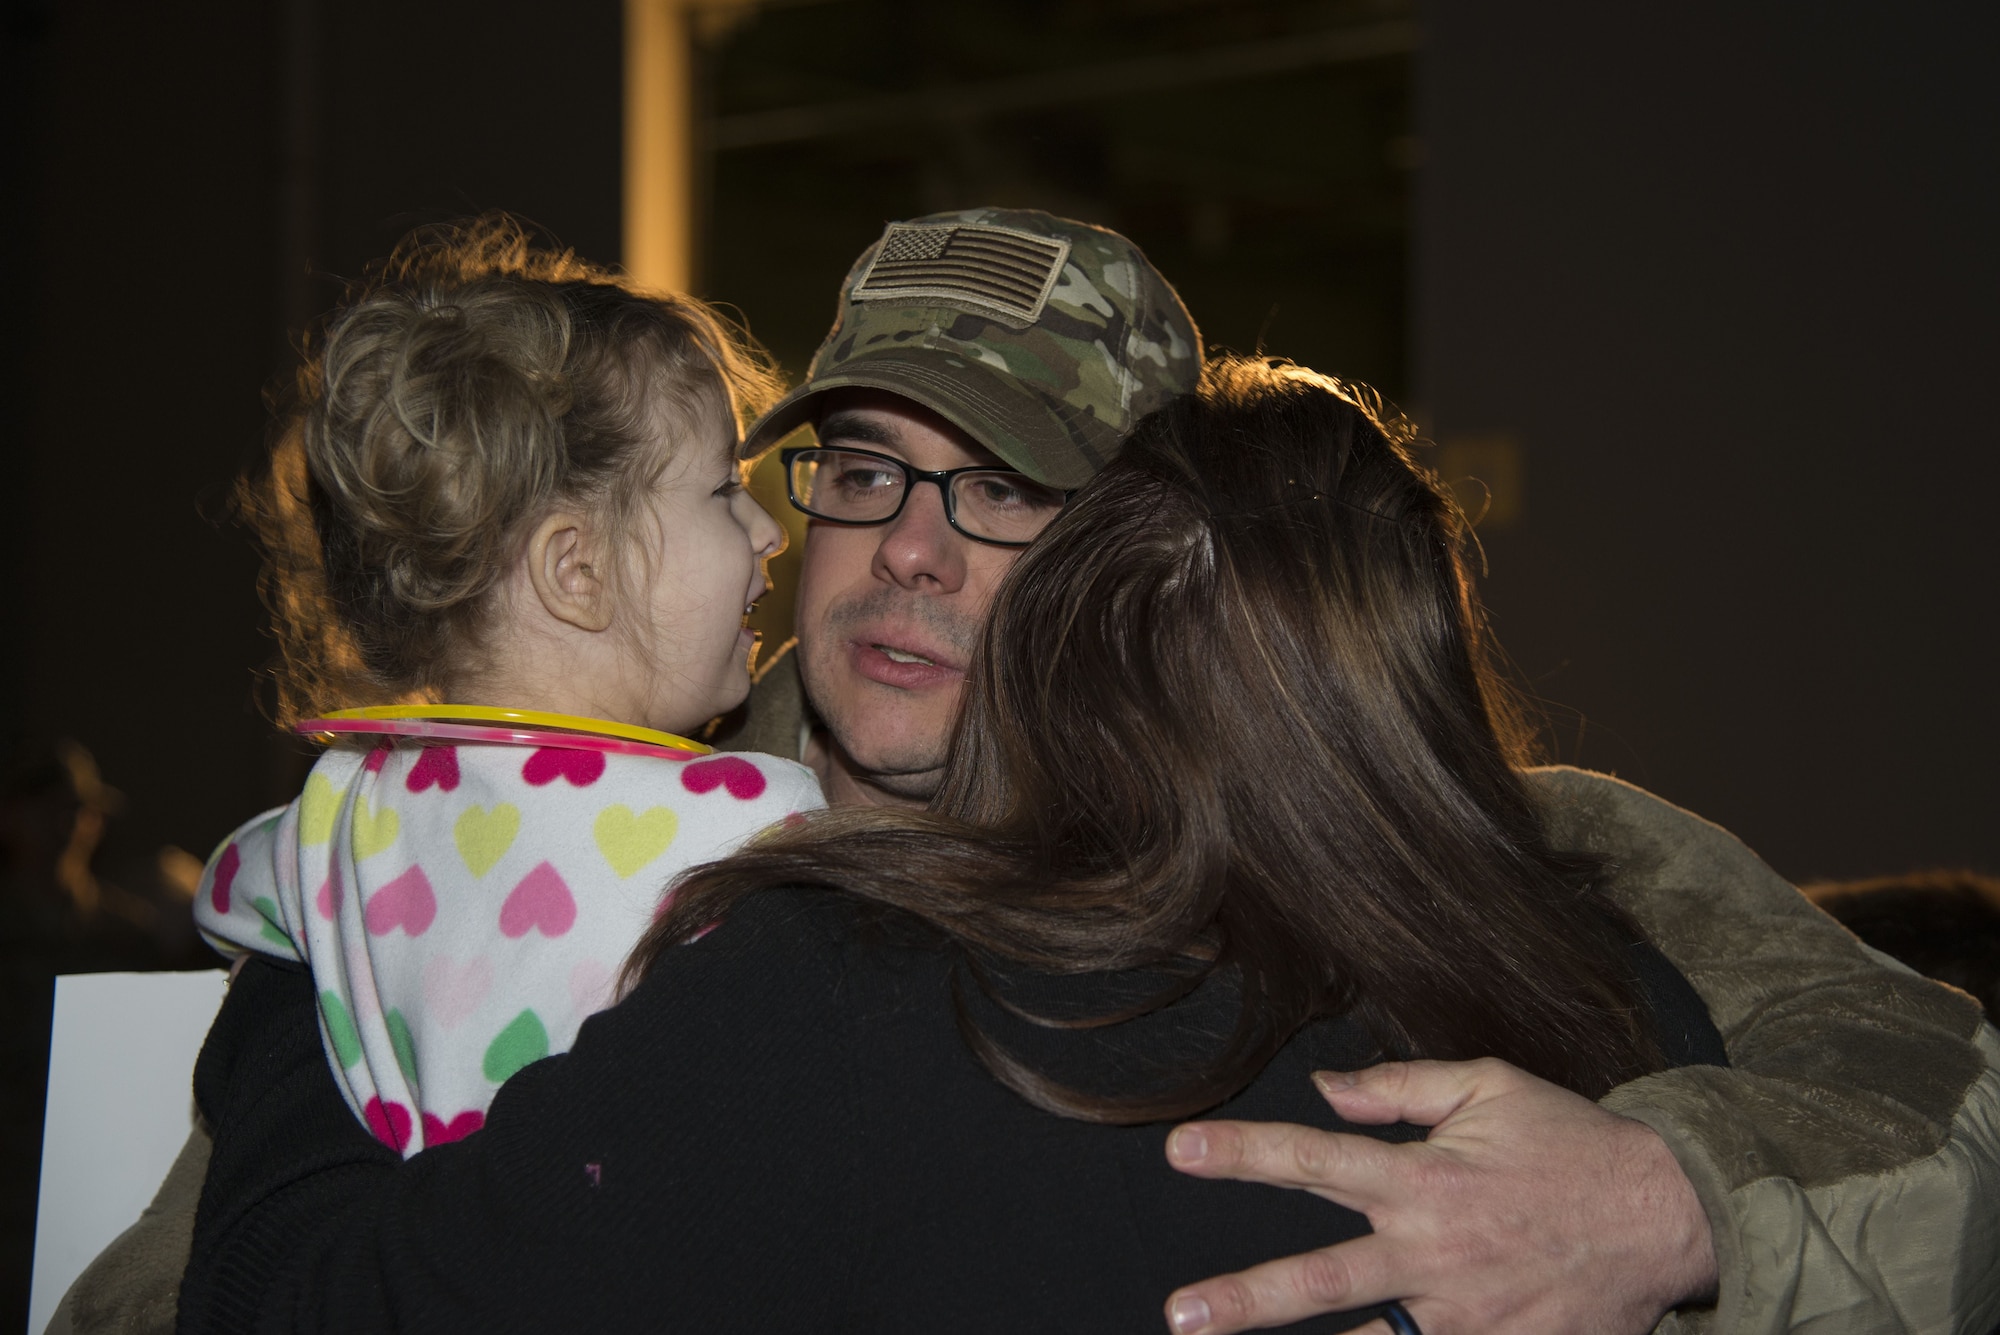 Master Sgt. Michael Johnson, 436th Security Forces Squadron defender, embraces his daughter, Amelia, and wife, Kelly, upon his return home from deployment Jan. 21, 2018, at Dover Air Force Base, Del. Johnson’s team was deployed to the Middle East for six months. (U.S. Air Force Photo by Staff Sgt. Aaron J. Jenne)